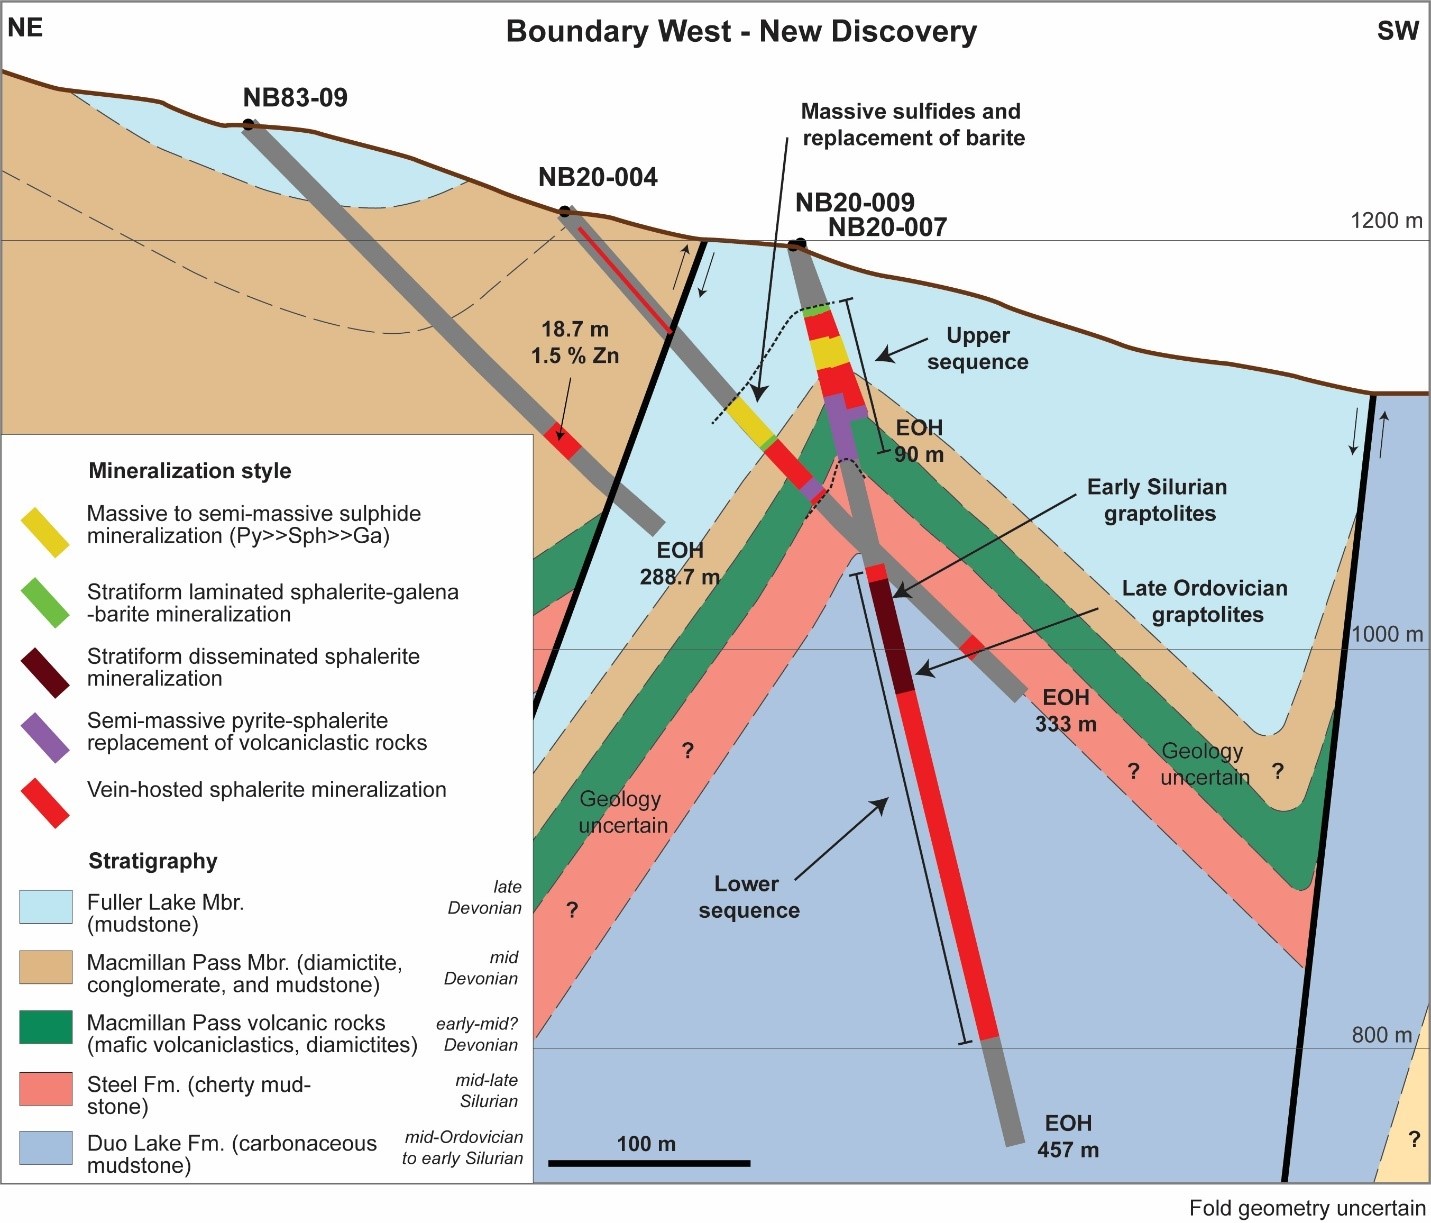 BOUNDARY WEST - NEWS DISCOVERY